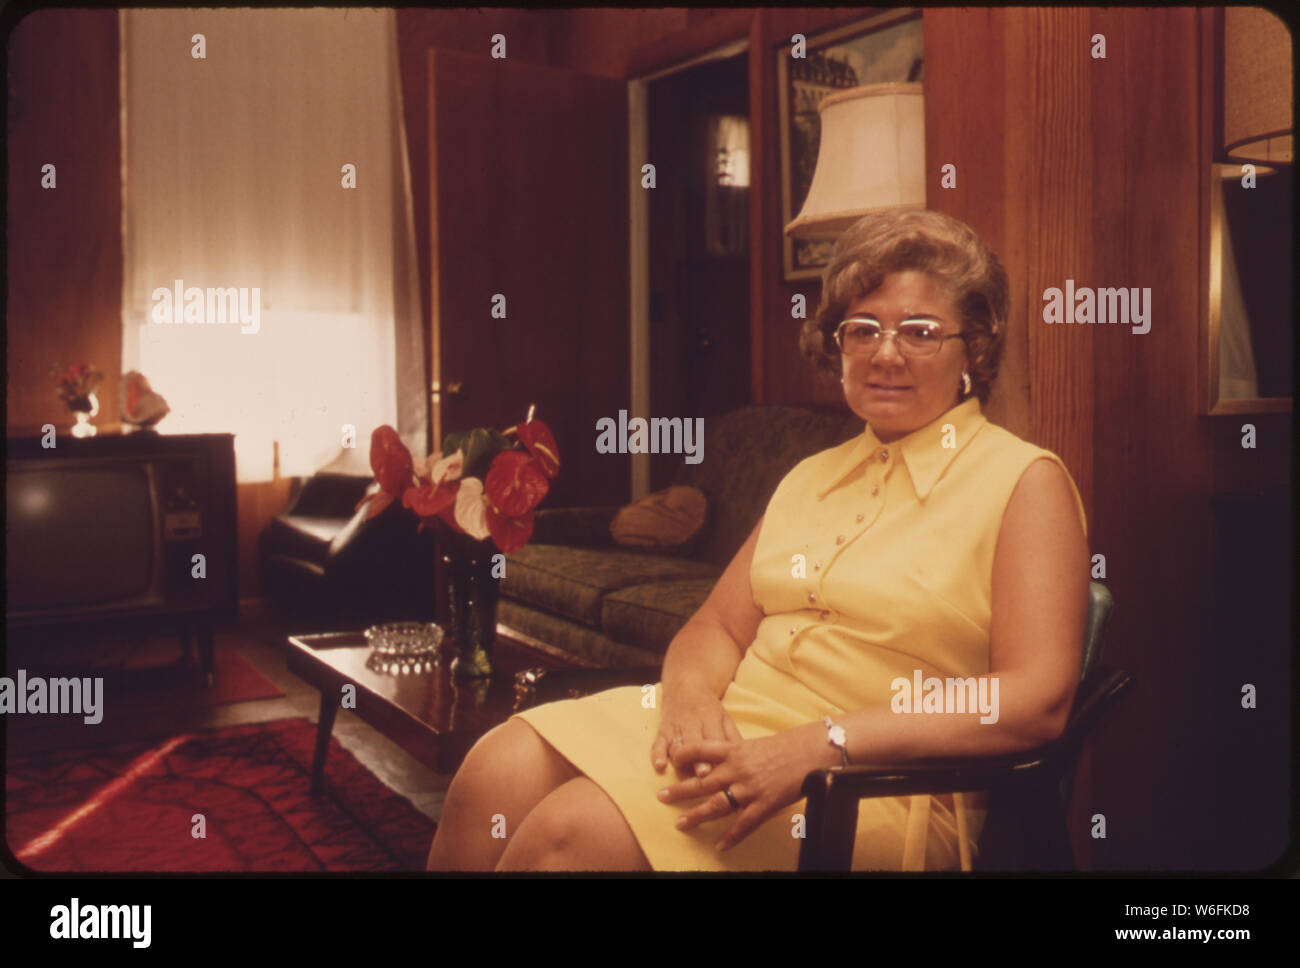 CAROLYN BROBREK IN LIVING ROOM OF HER HOME AT 99 COWPER STREET WHERE, IN OCTOBER 1969, SHE FELT HER EARS POP WHEN A JET TOOK OFF. IT WAS DISCOVERED THAT A BONE IN THE INNER EAR HAD BROKEN CORRECTIVE WORK WAS DONE BUT SHE STILL HAS A 15-20 HEARING LOSS IN HER RIGHT EAR Stock Photo